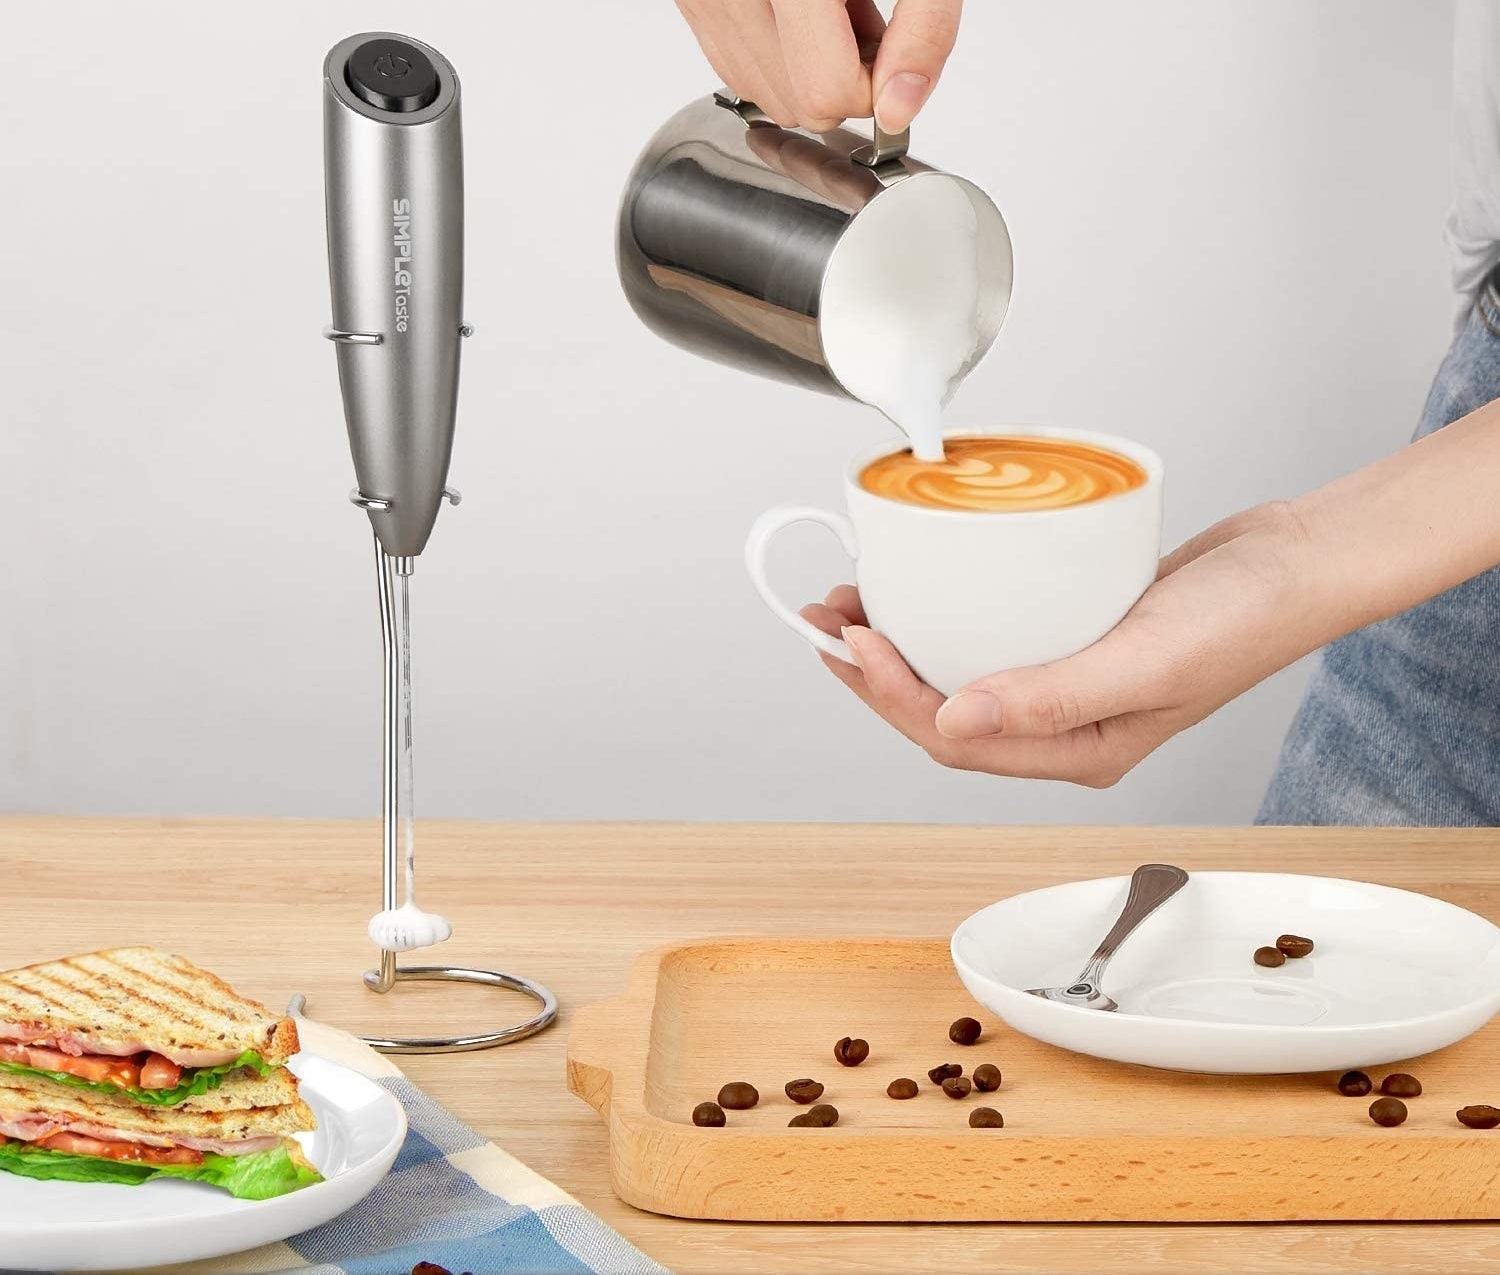 milk frother on stand next to person pouring milk into a drink